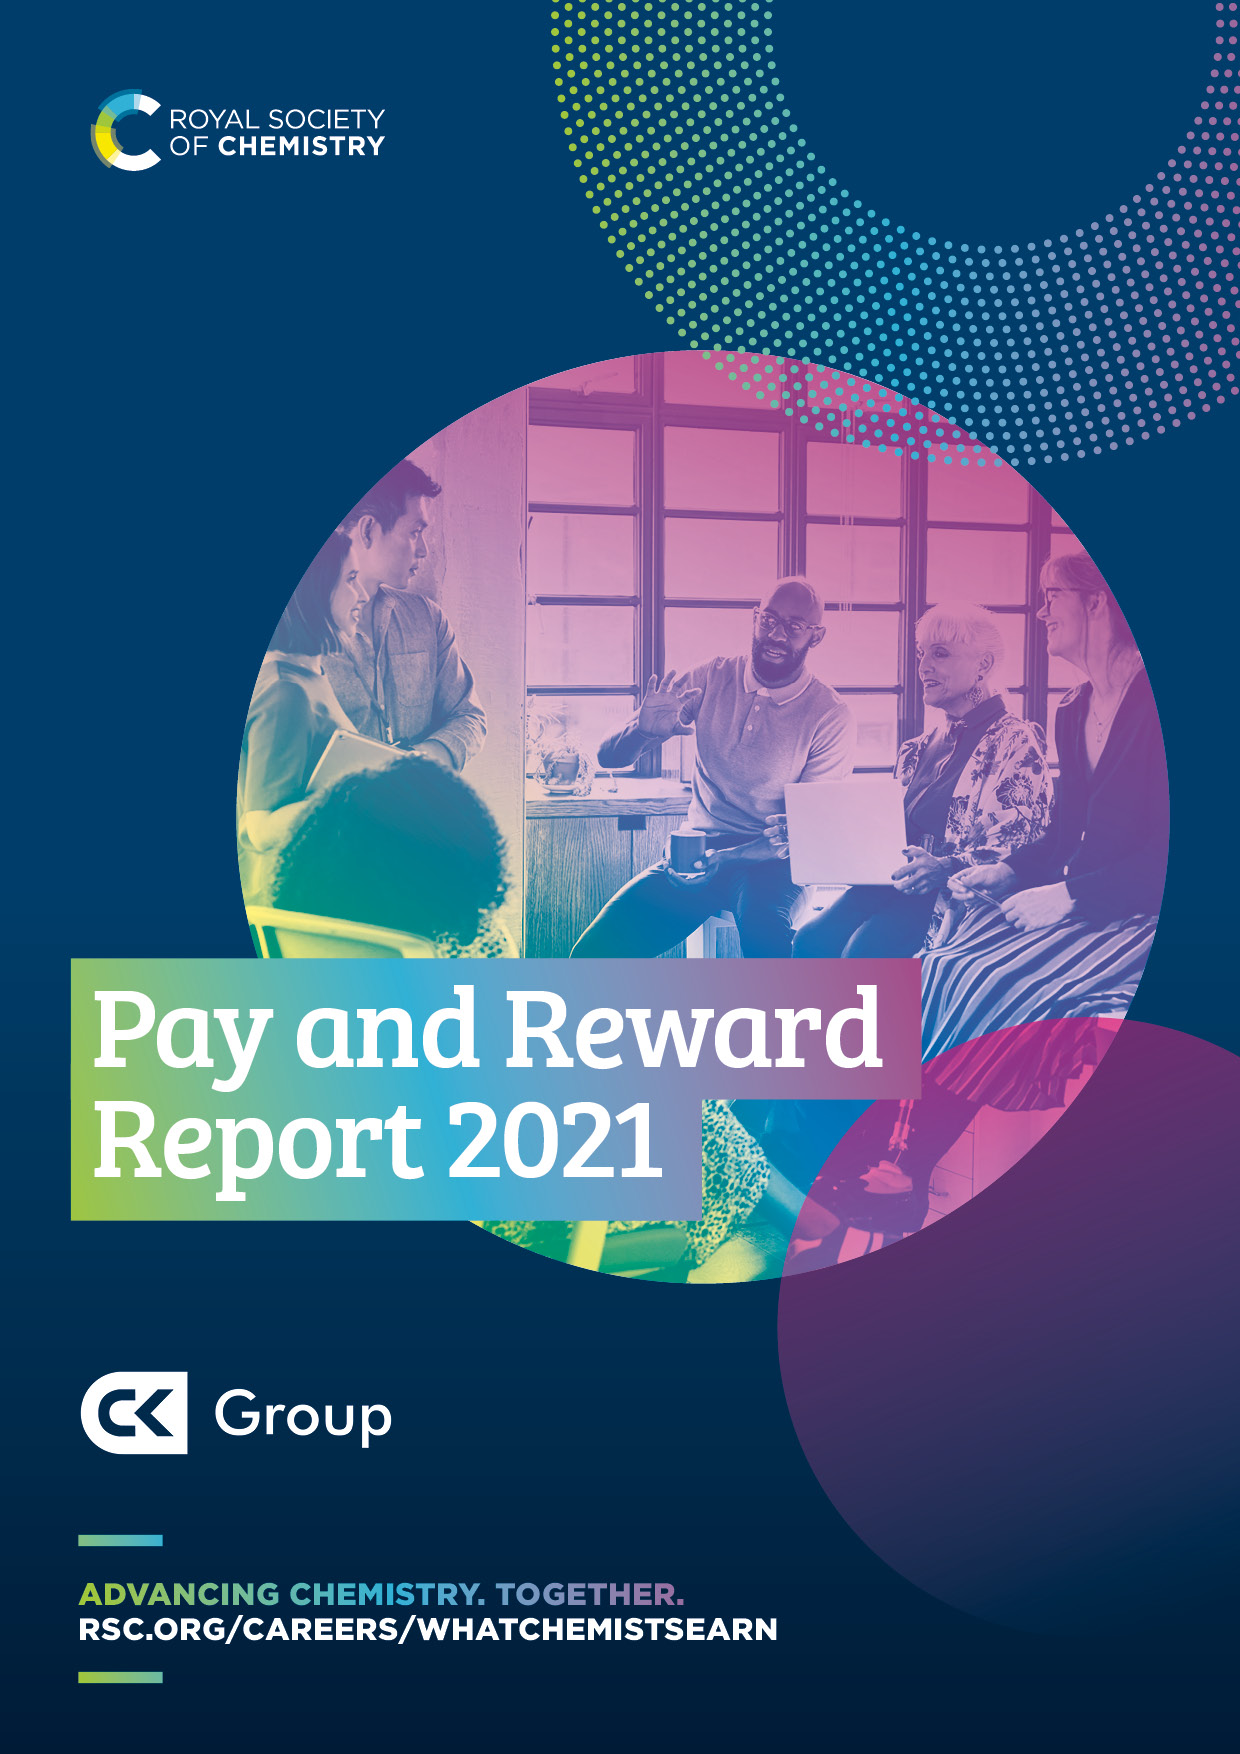 Pay and Reward Report Cover showing scientific employess sitting together talking